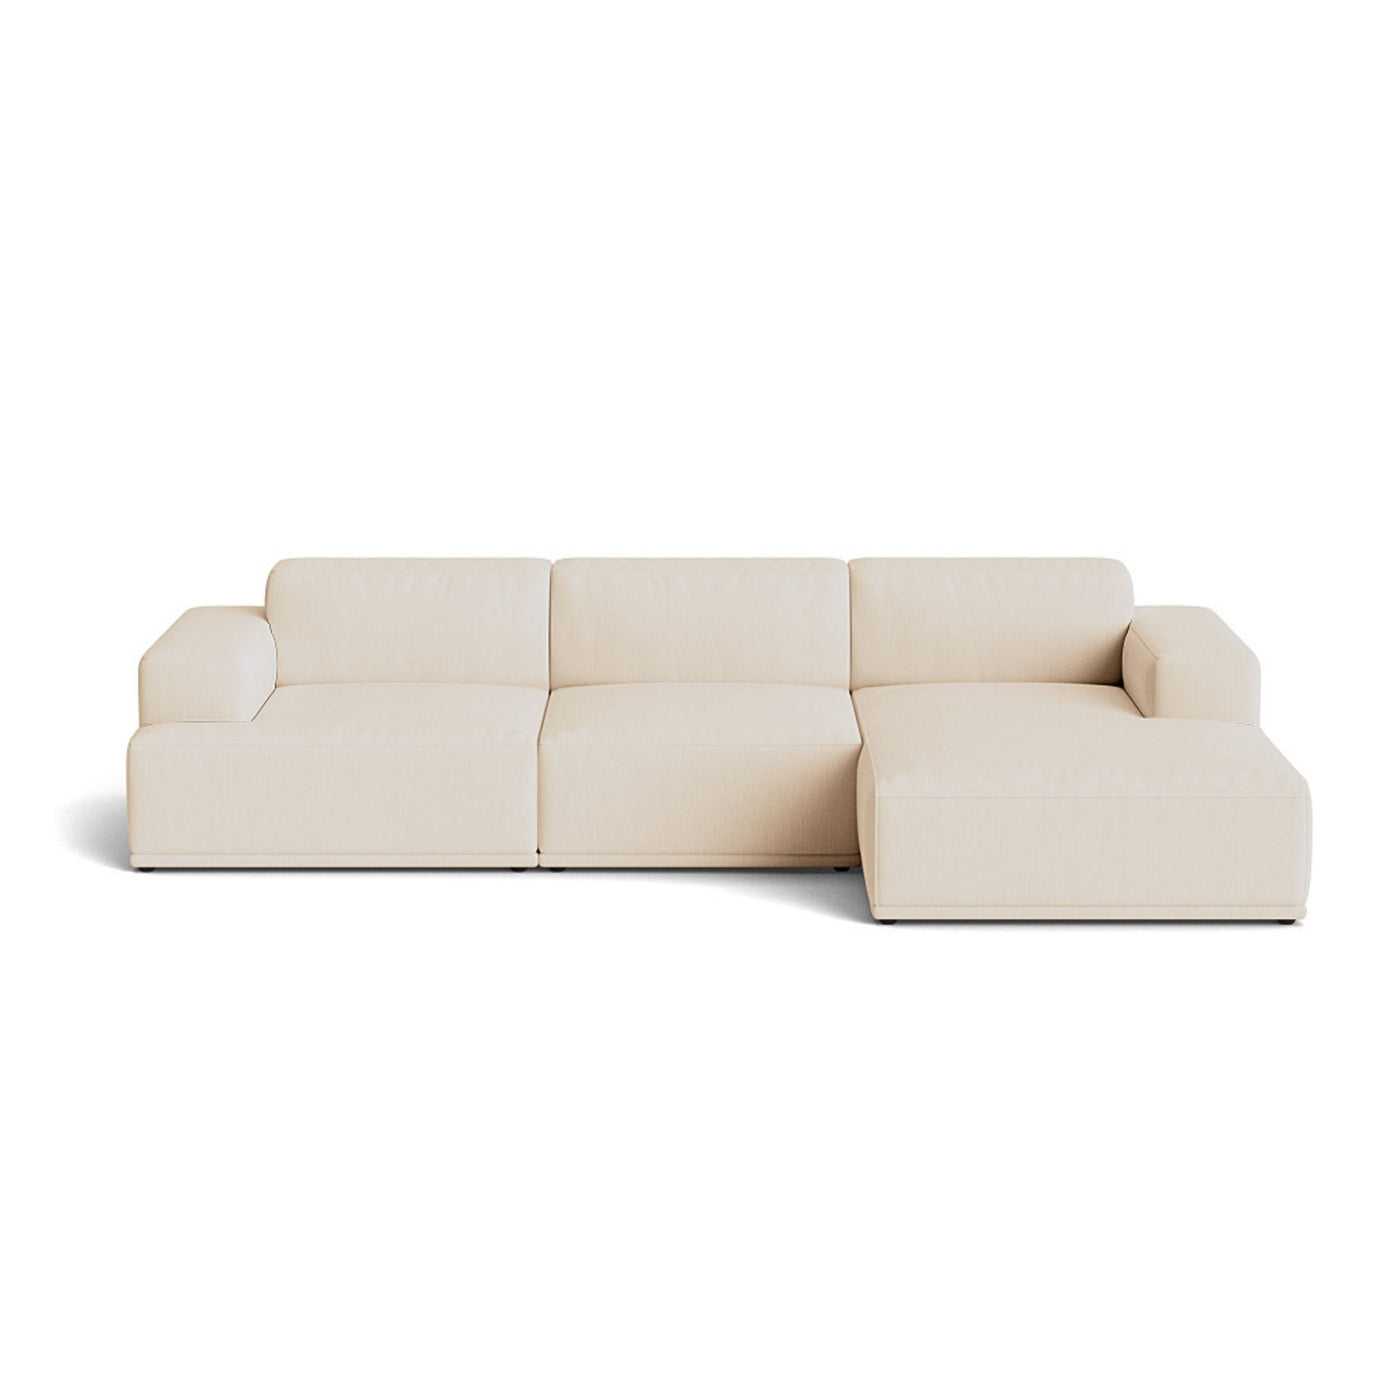 Muuto Connect Soft Modular 3 Seater Sofa, configuration 3. Made-to-order from someday designs. #colour_balder-612